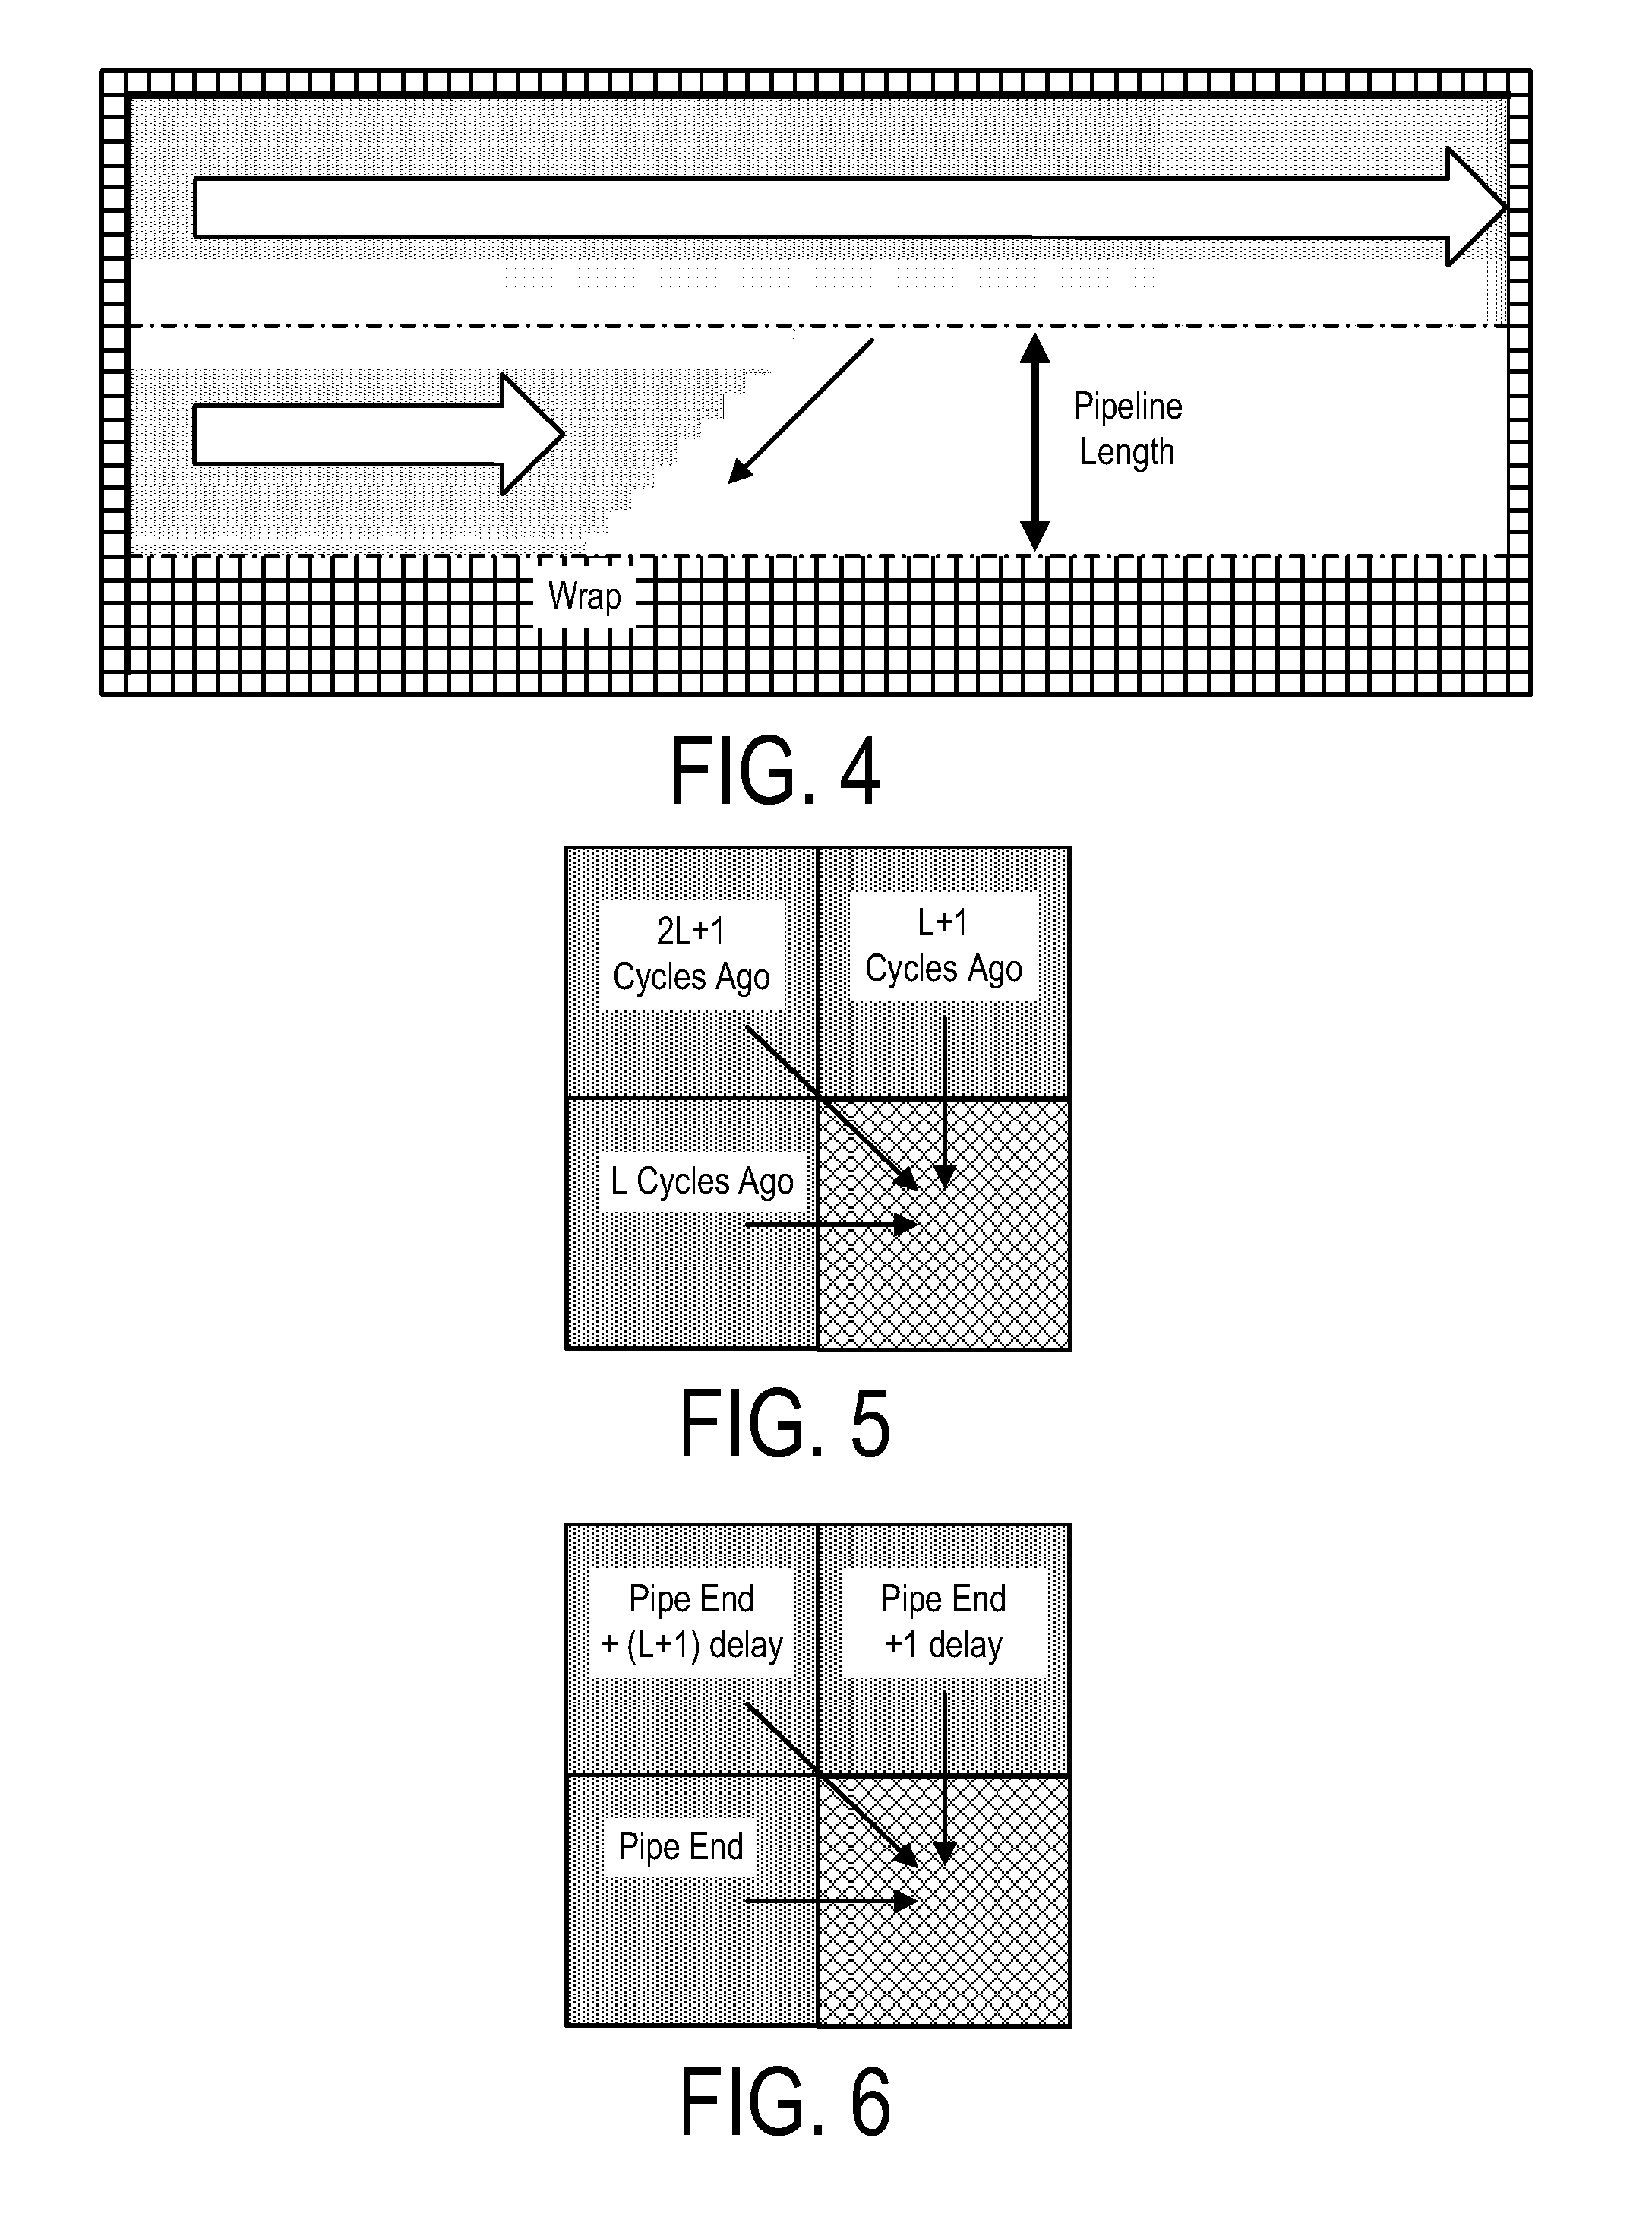 Bioinformatics systems, apparatuses, and methods executed on an integrated circuit processing platform